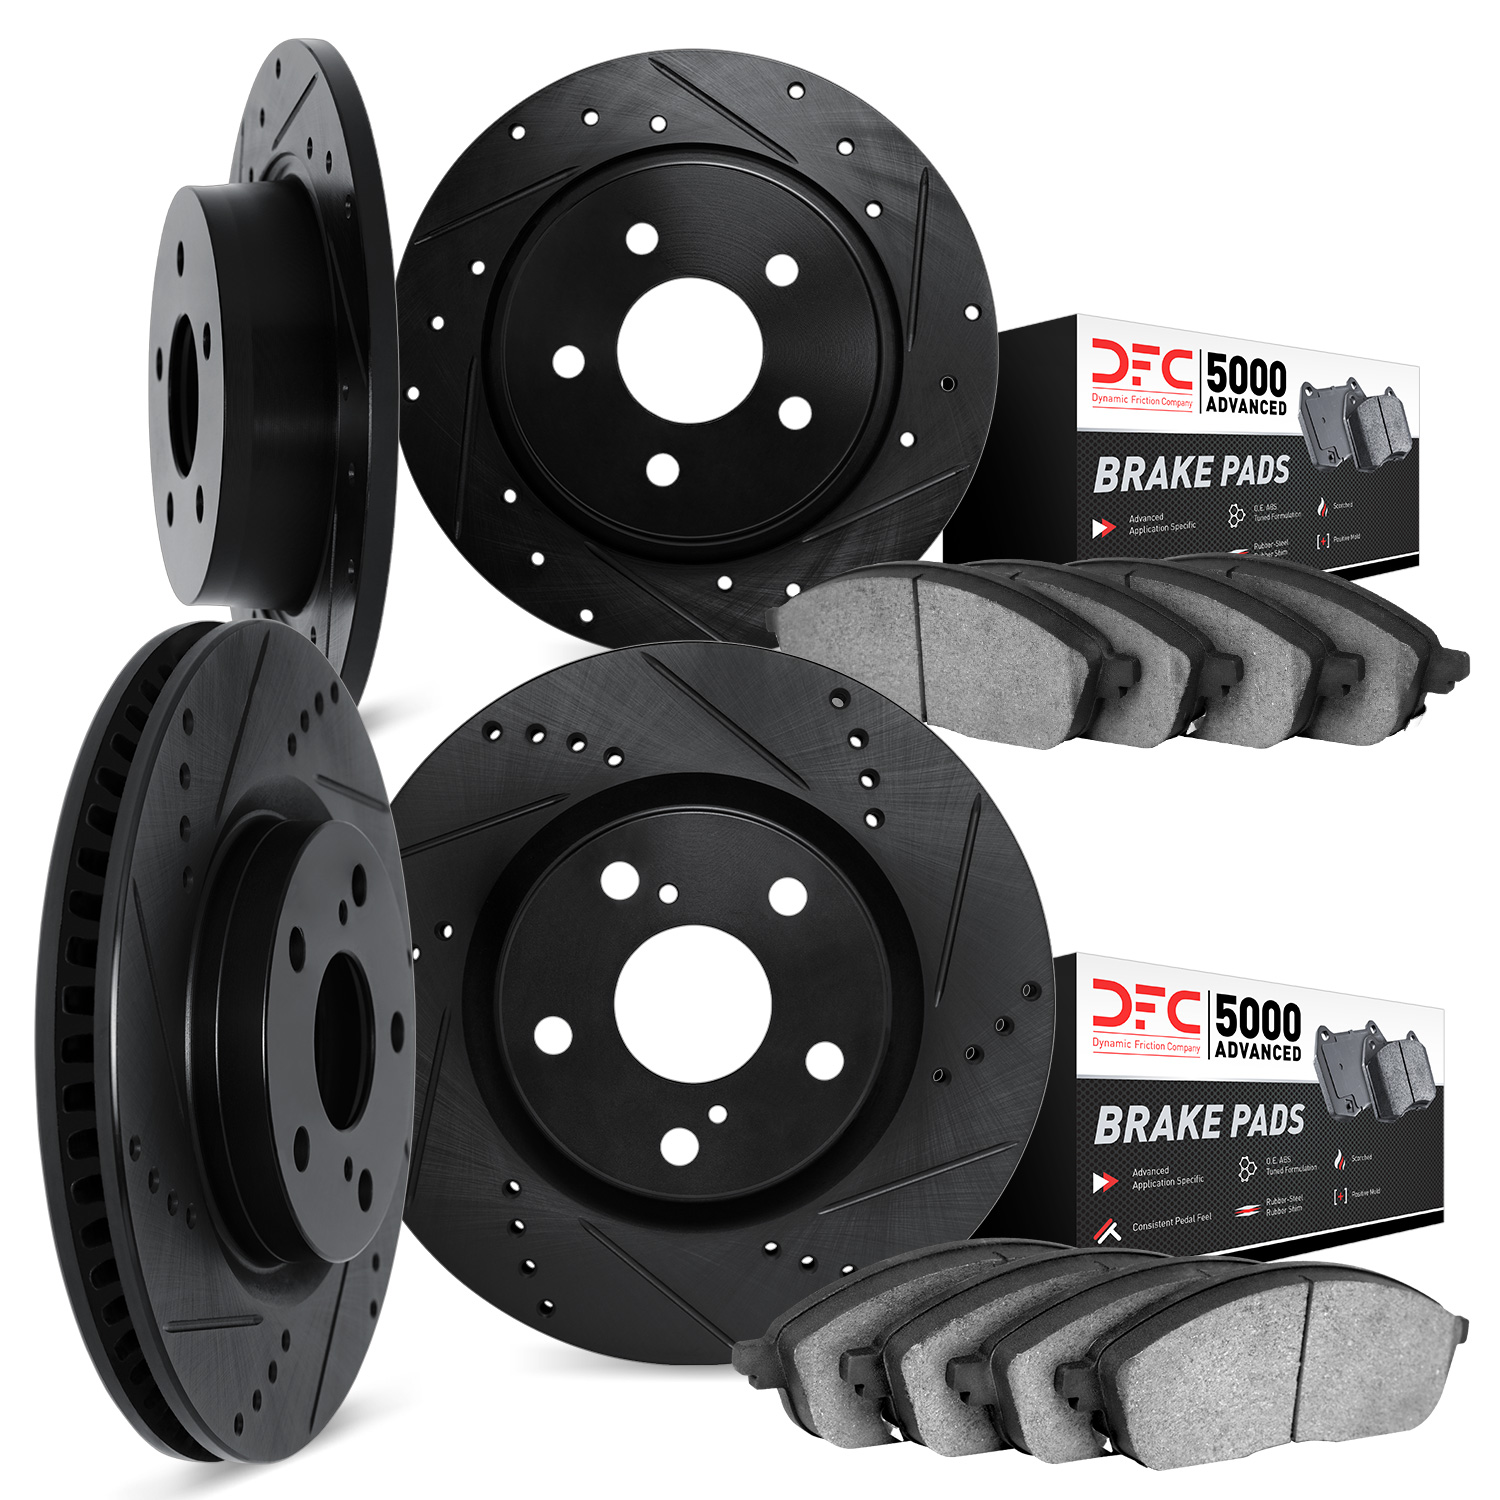 8504-67107 Drilled/Slotted Brake Rotors w/5000 Advanced Brake Pads Kit [Black], Fits Select Infiniti/Nissan, Position: Front and